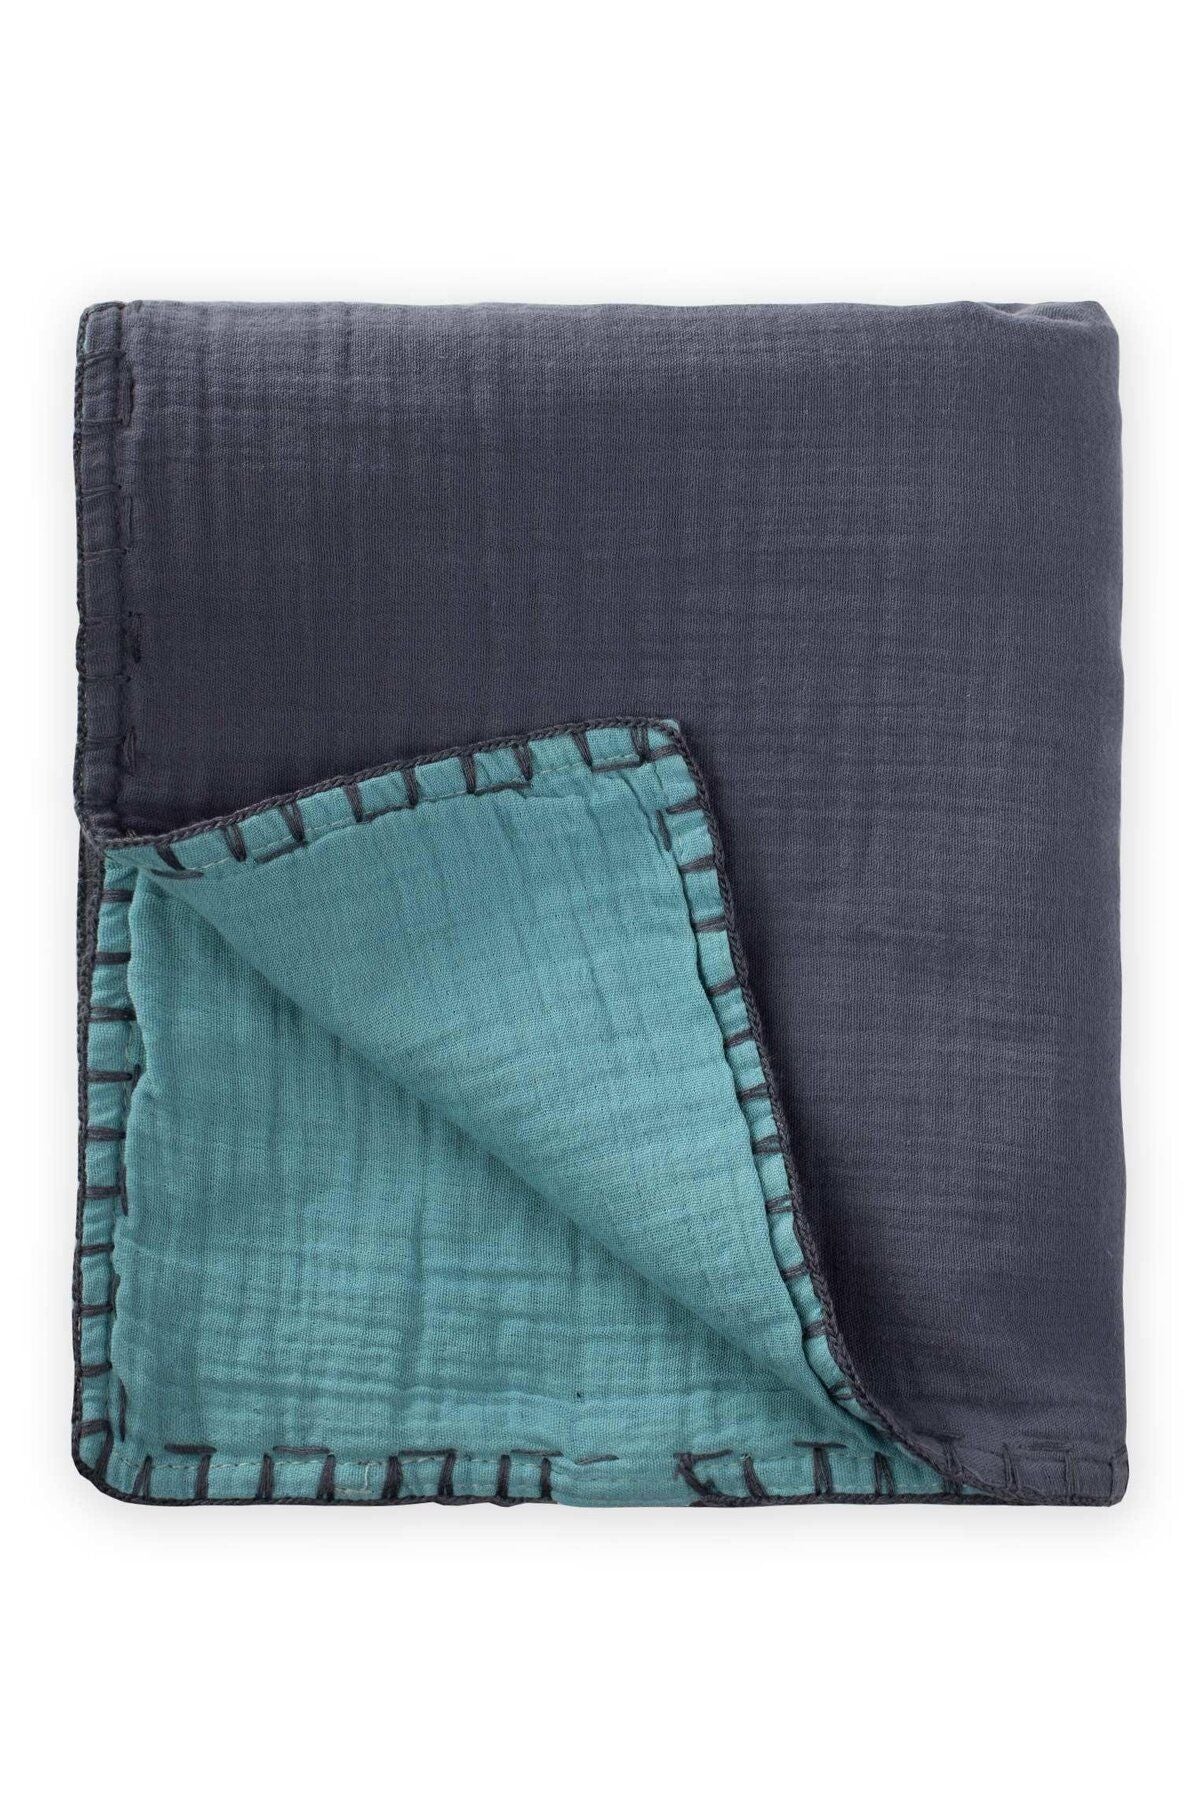 Muslin double -sided baby blanket (washed) 100x100 cm smoked turquoise turquoise